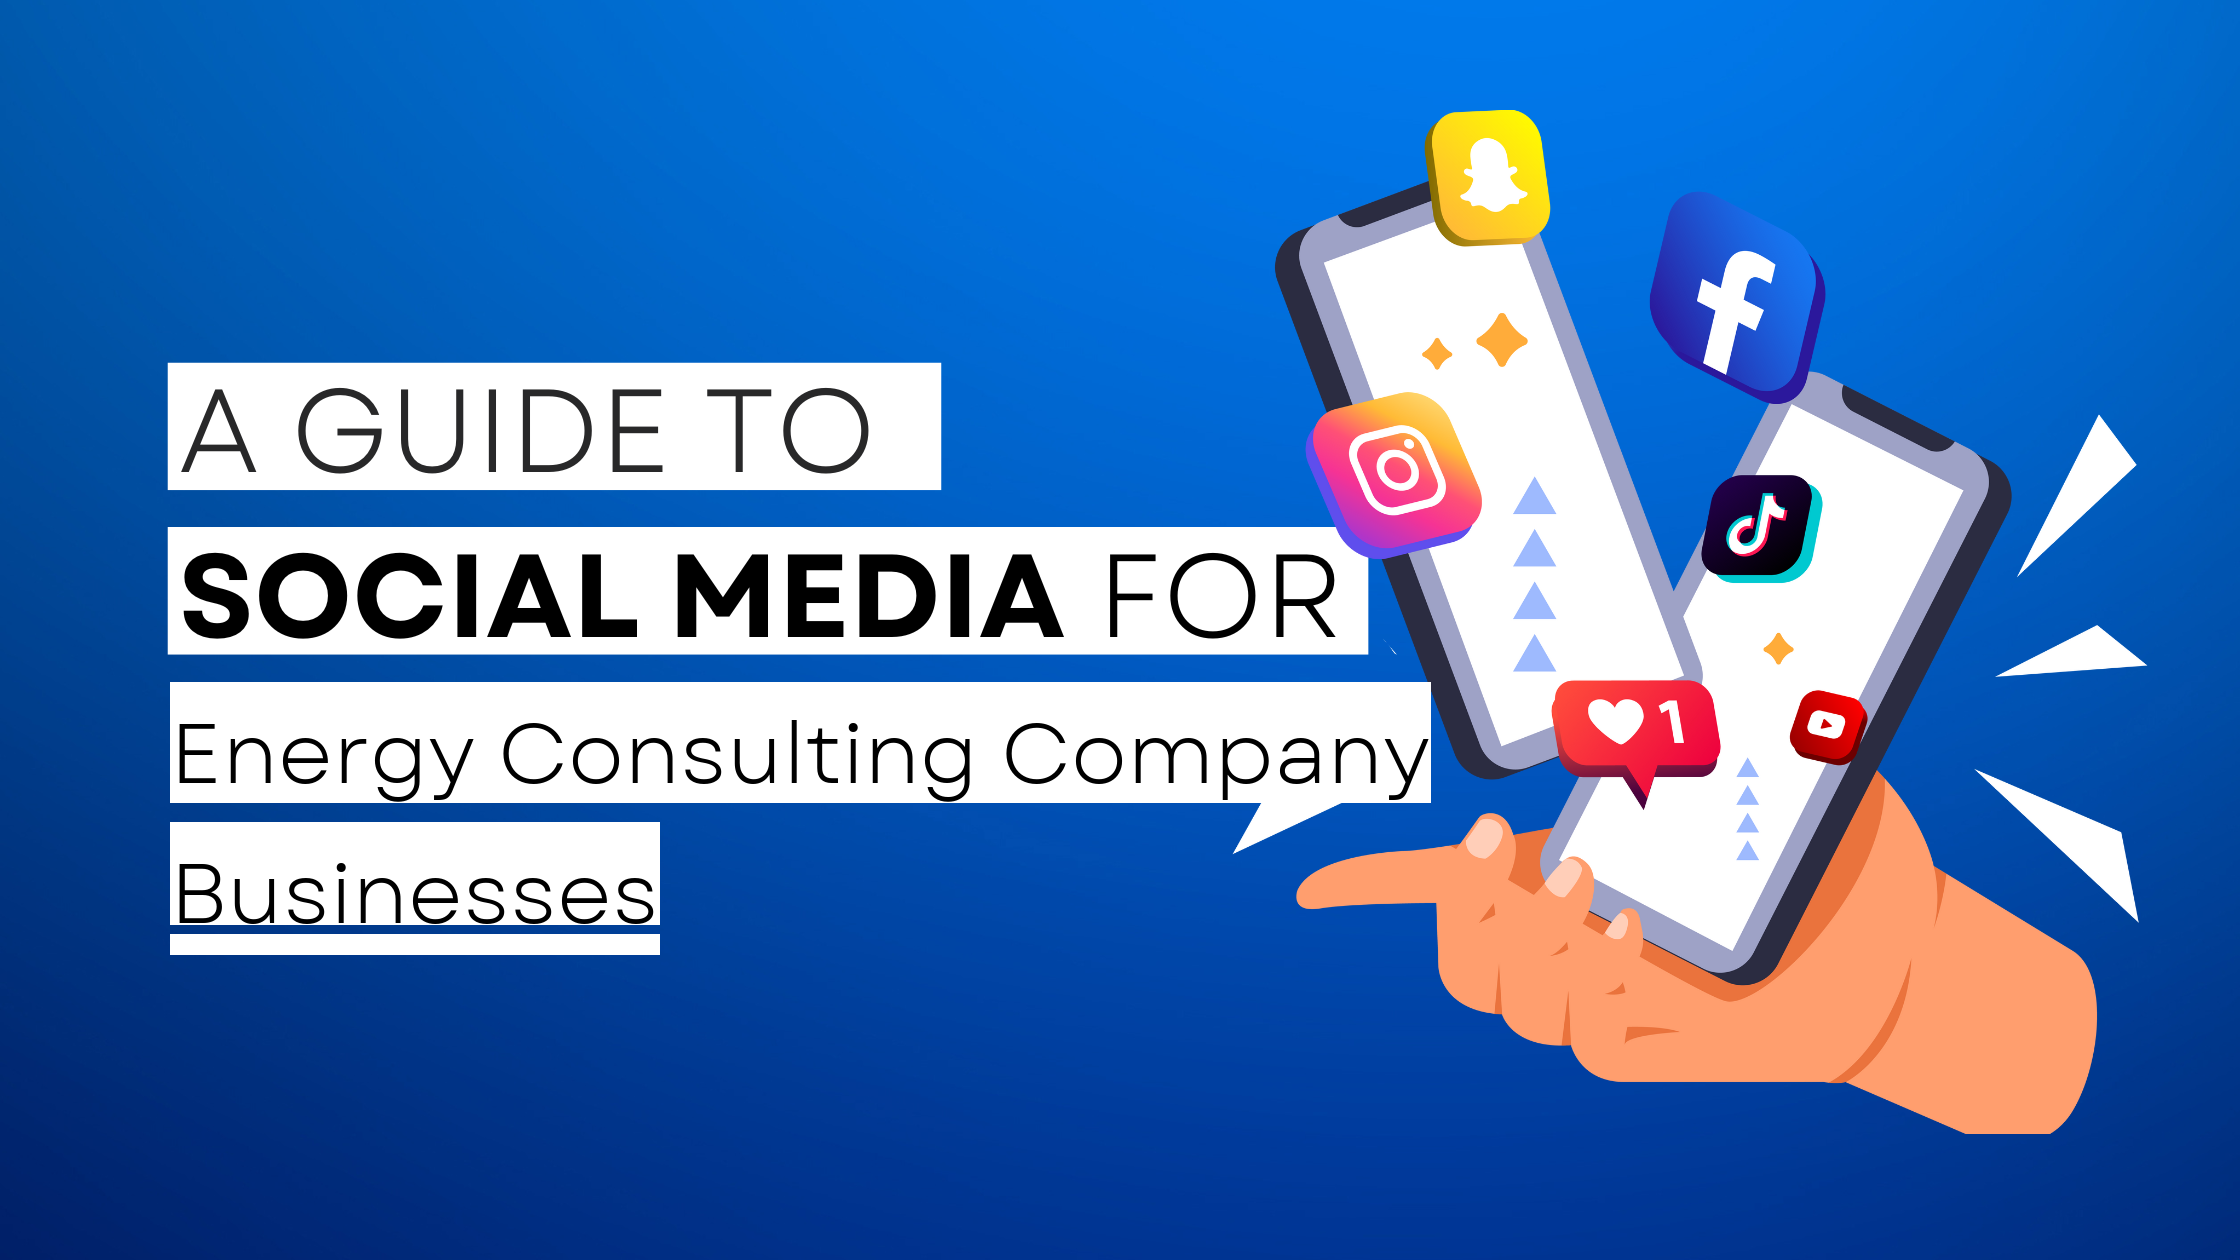 How to start Energy Consulting Company  on social media